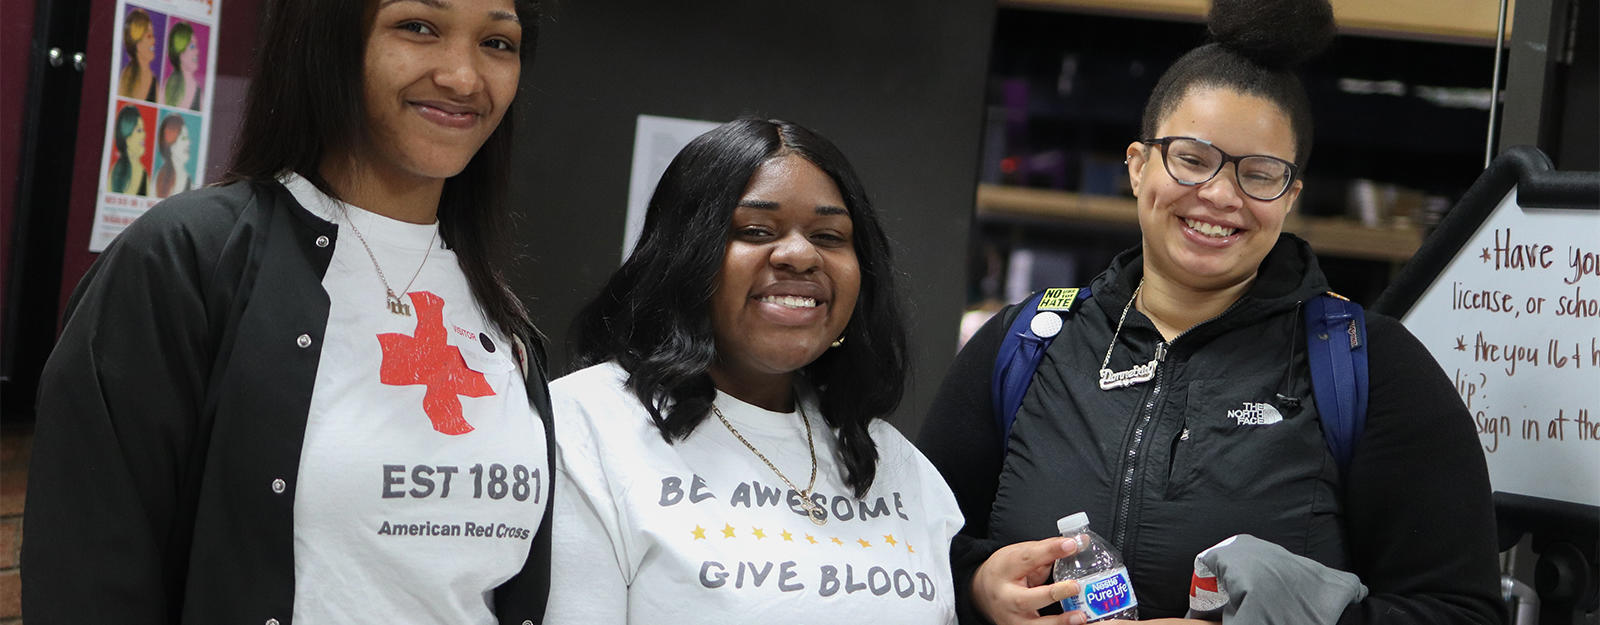 Students posing for a picture with a Red Cross employee during a blood drive.